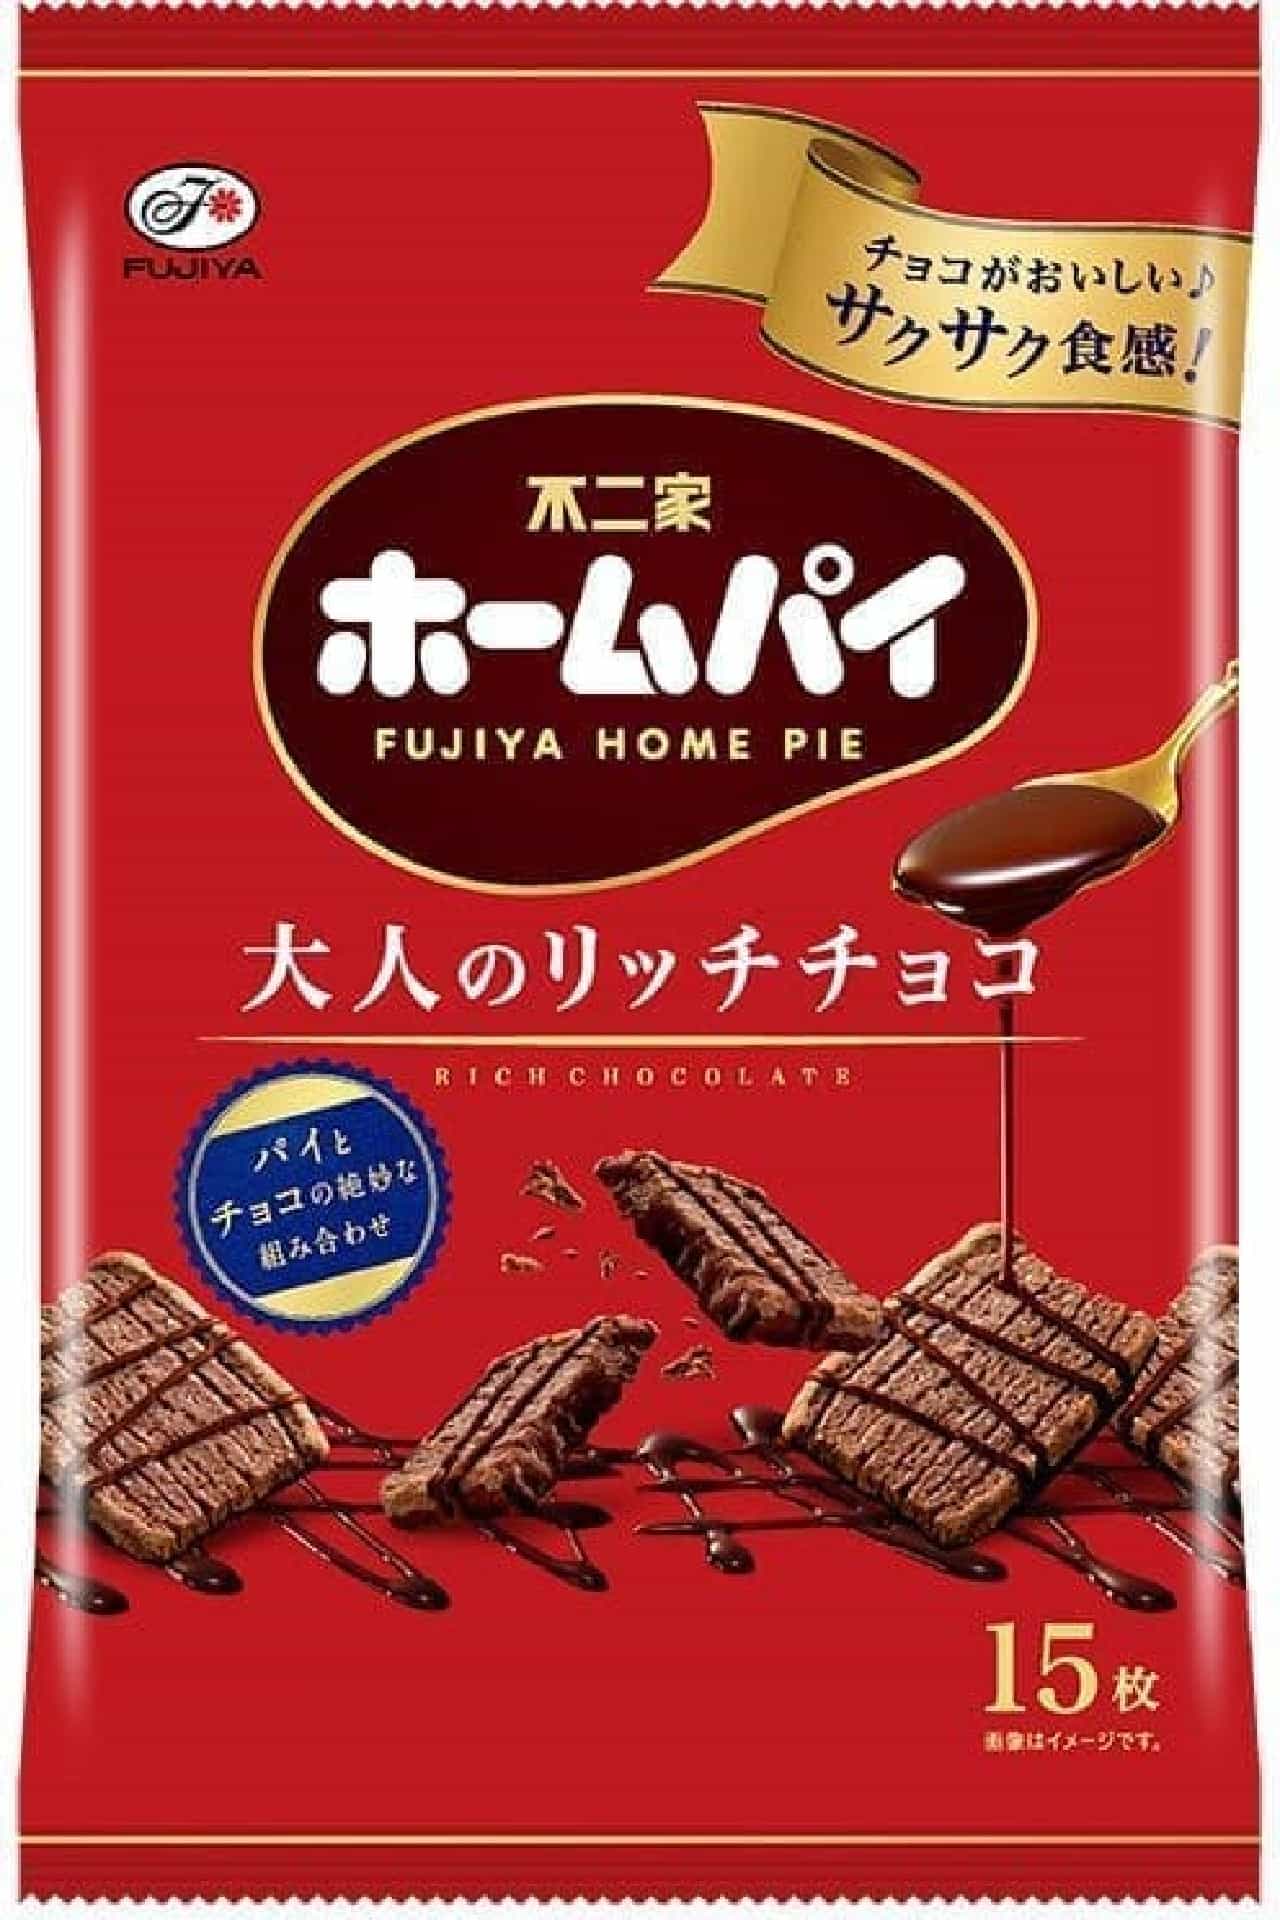 Fujiya "Home Pie (Adult Rich Chocolate) Middle Pack"